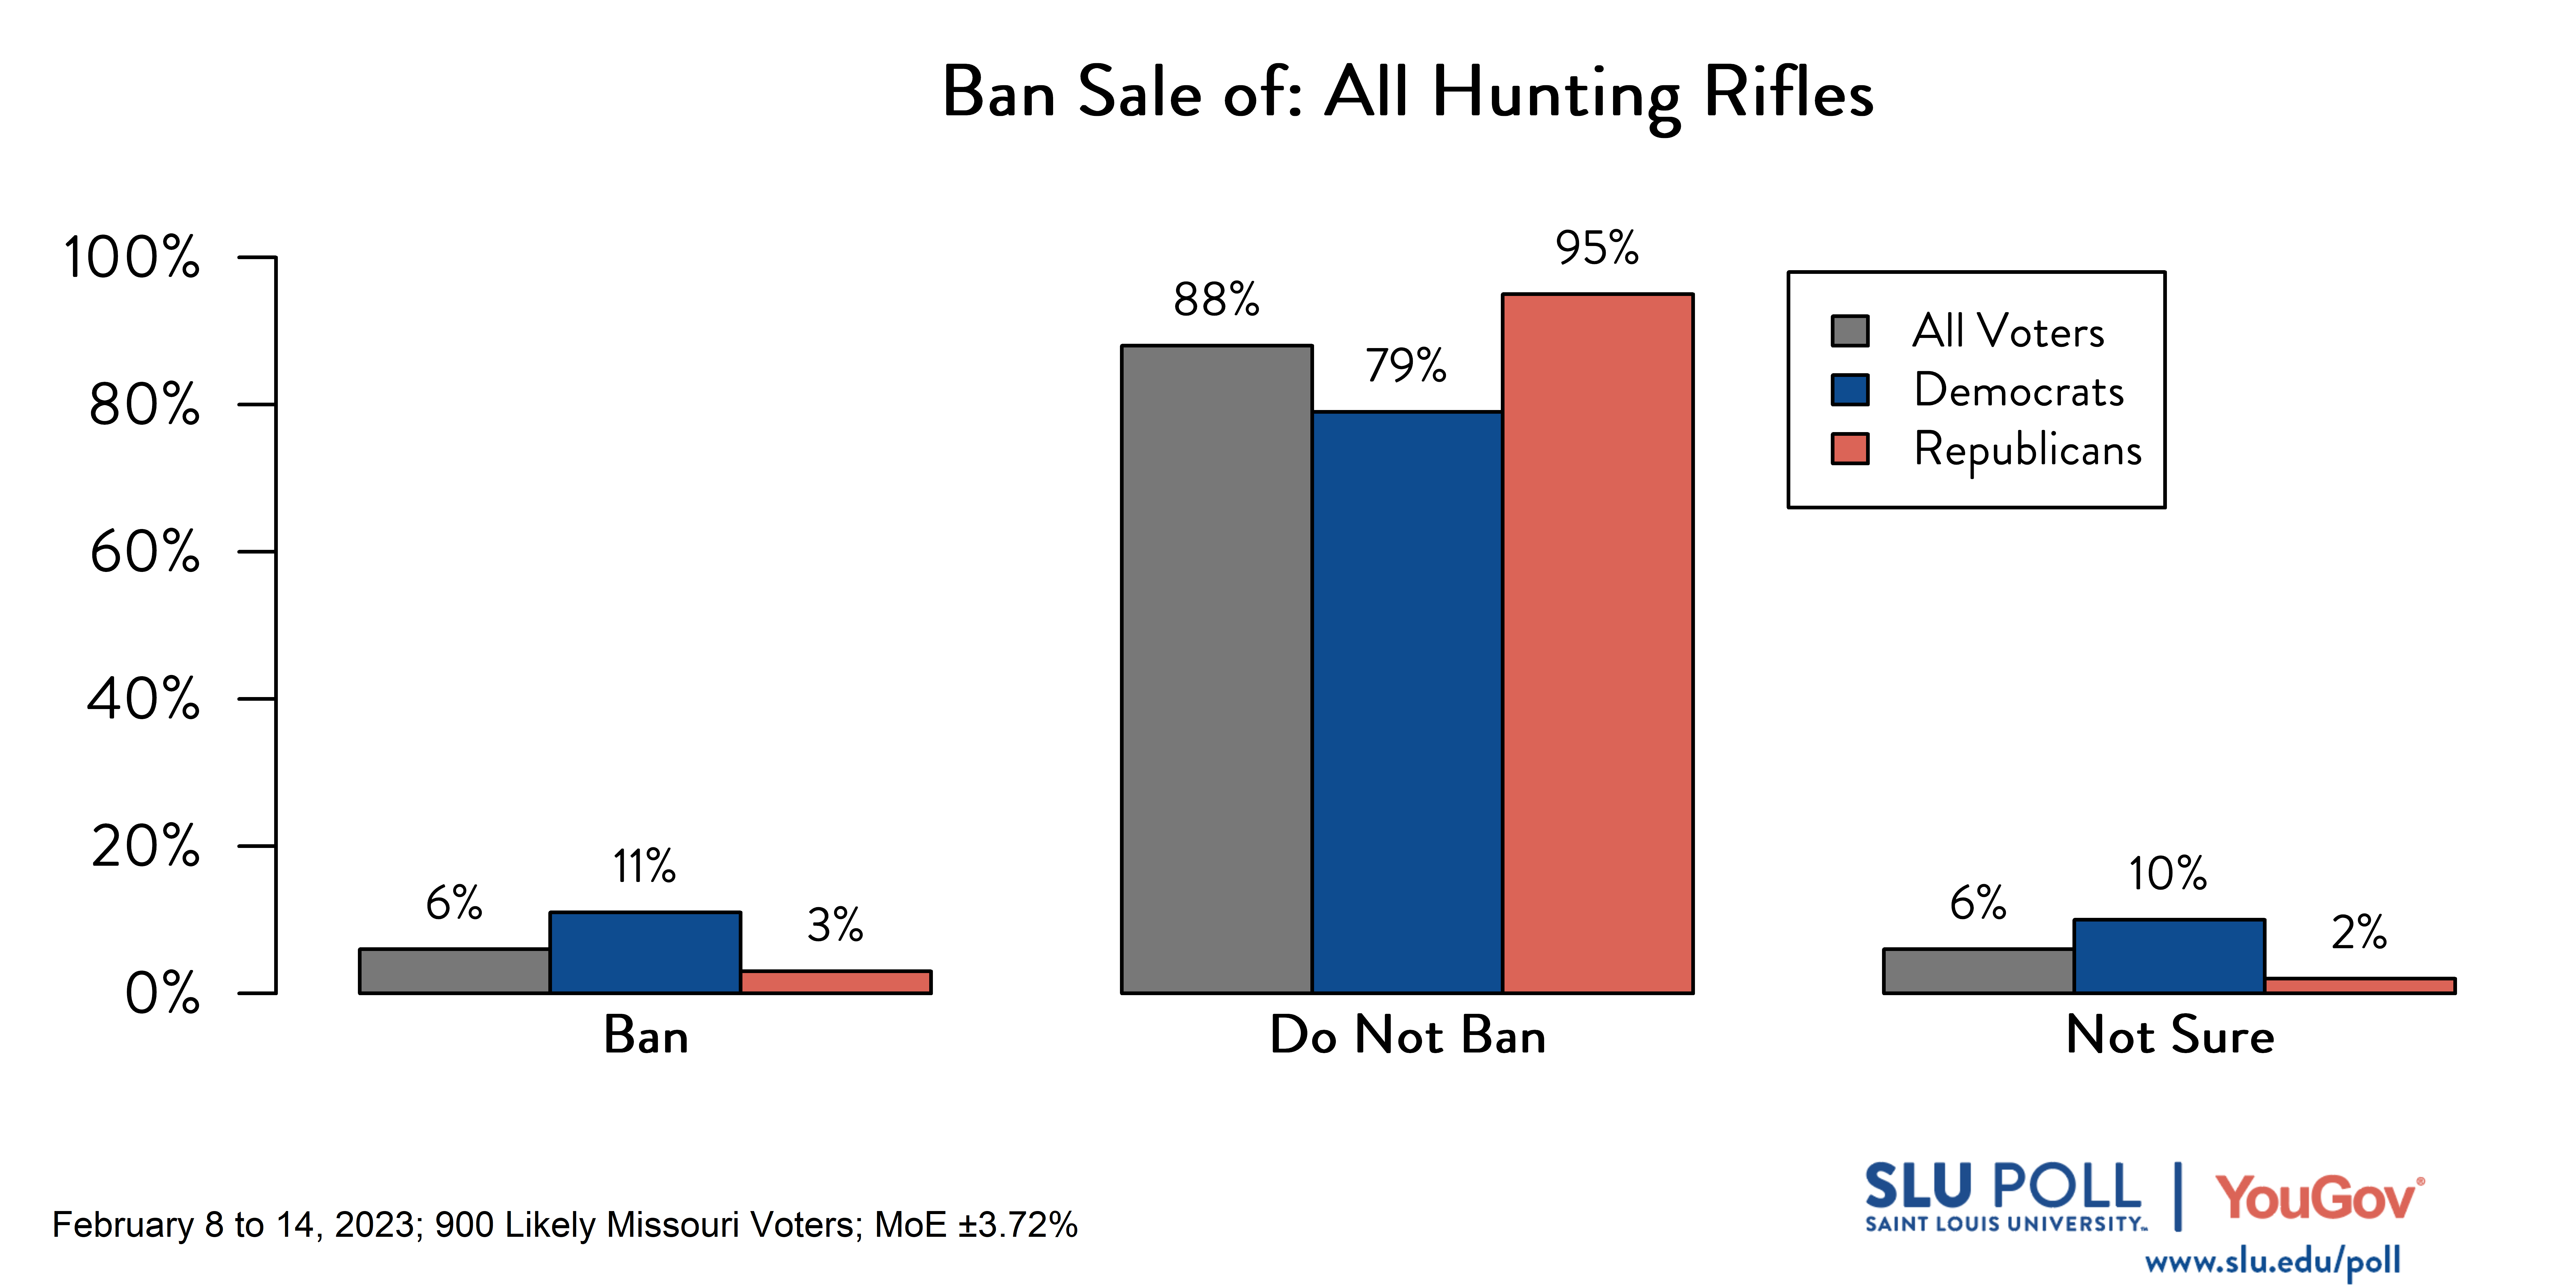 Likely voters' responses to 'Do you support banning the following gun-related sales, except those that are issued to law enforcement officers: The sale of all hunting rifles?': 6% Ban, 88% Do not ban, and 6% Not sure. Democratic voters' responses: ' 11% Ban, 79% Do not ban, and 10% Not sure. Republican voters' responses: 3% Ban, 95% Do not ban, and 2% Not sure.